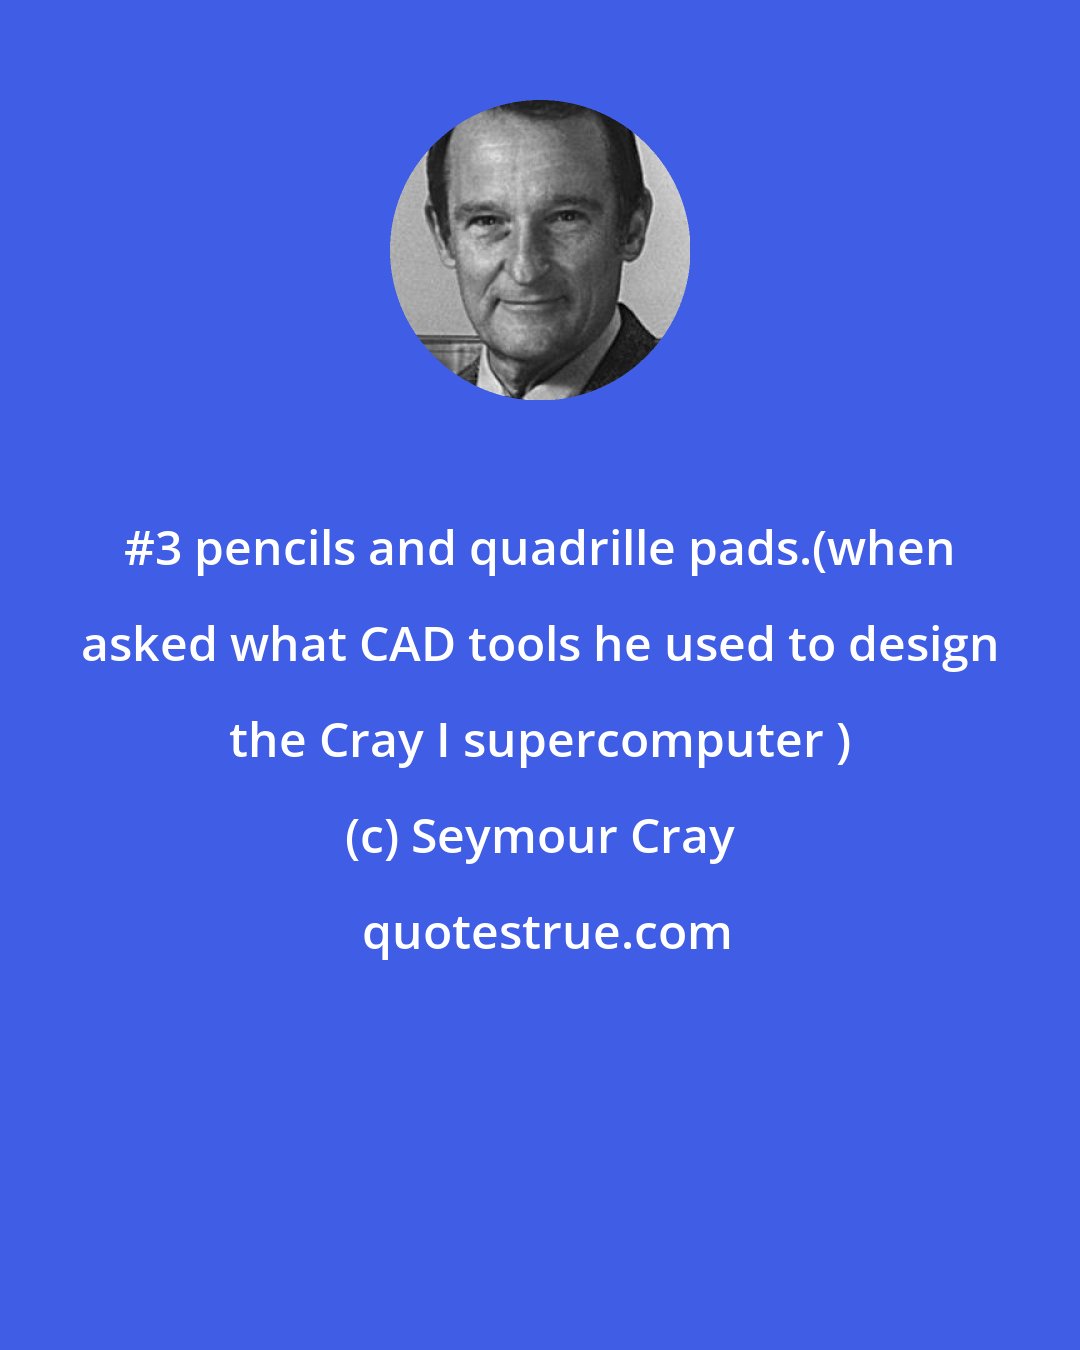 Seymour Cray: #3 pencils and quadrille pads.(when asked what CAD tools he used to design the Cray I supercomputer )